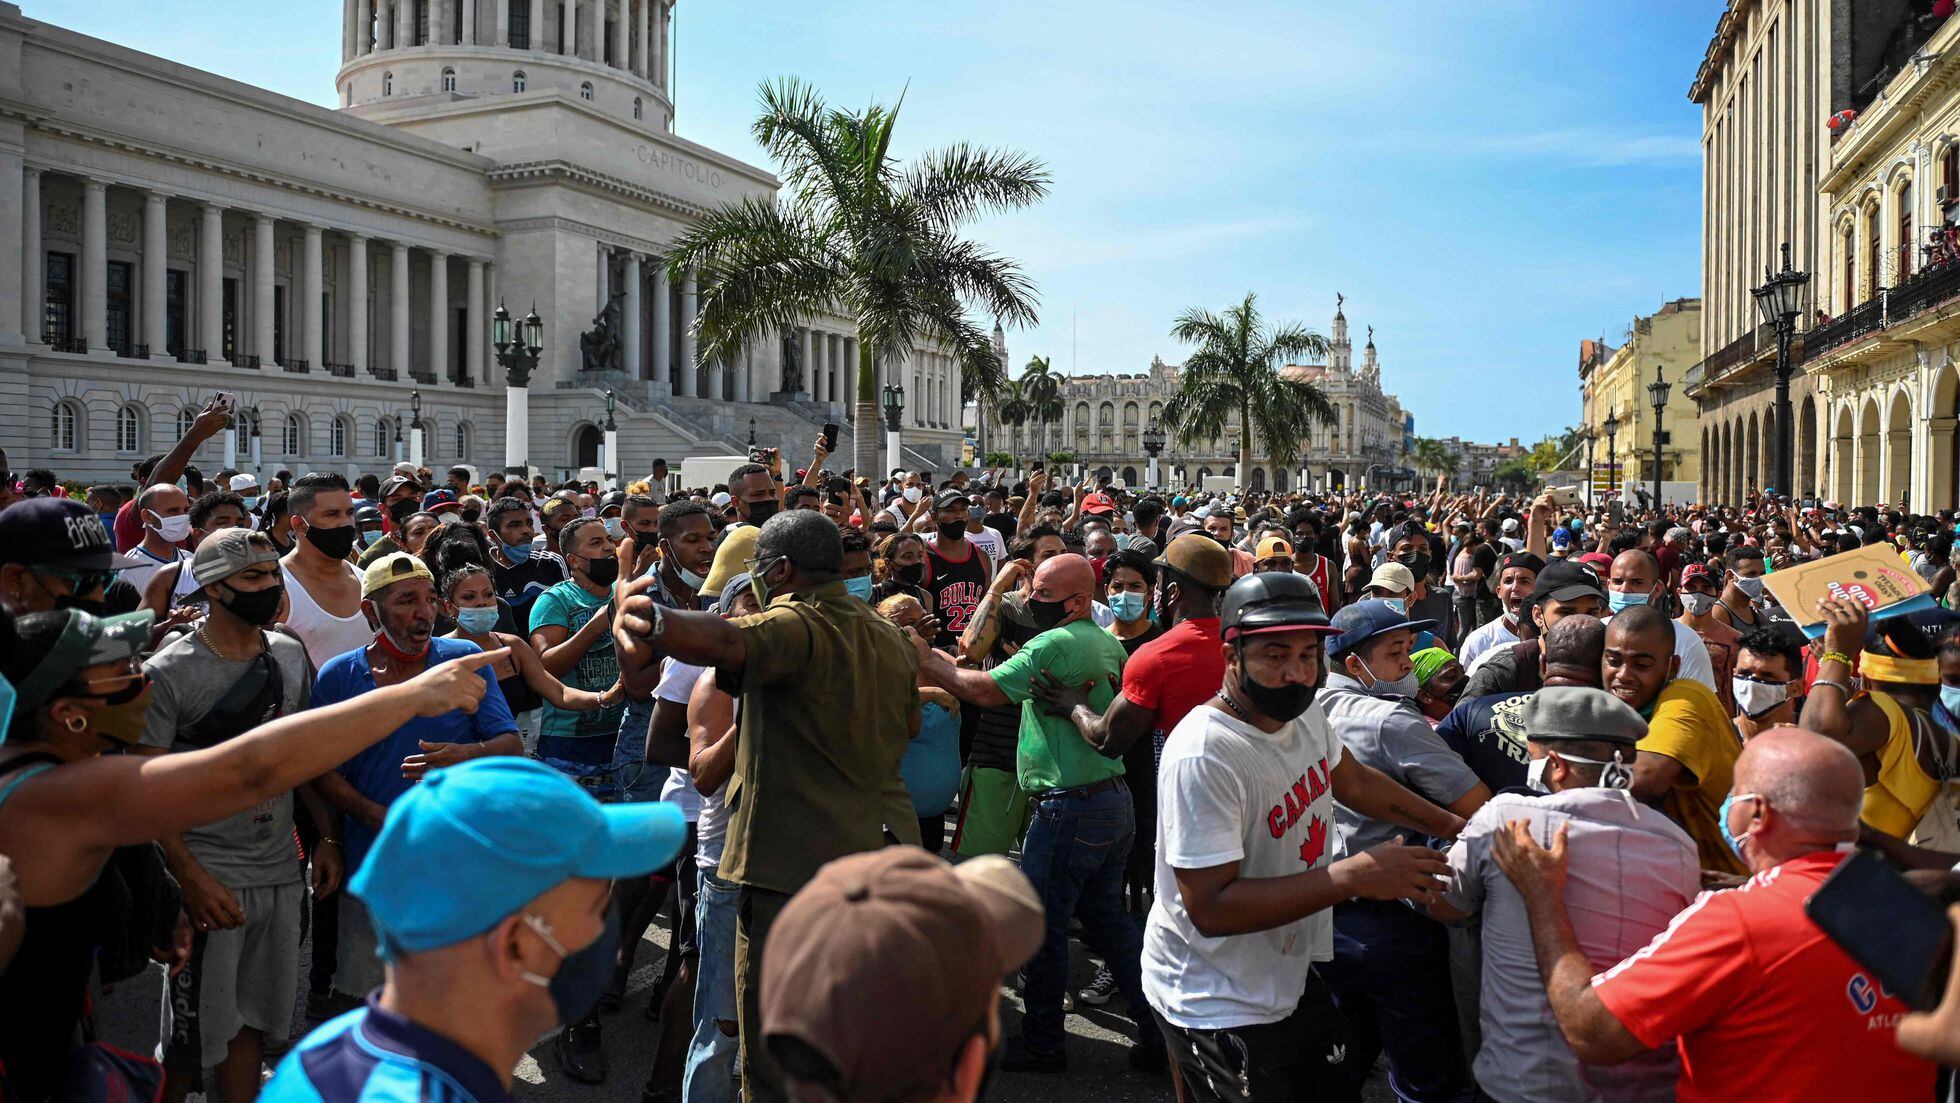 Cuban MLB players show support for anti-government protests in Cuba